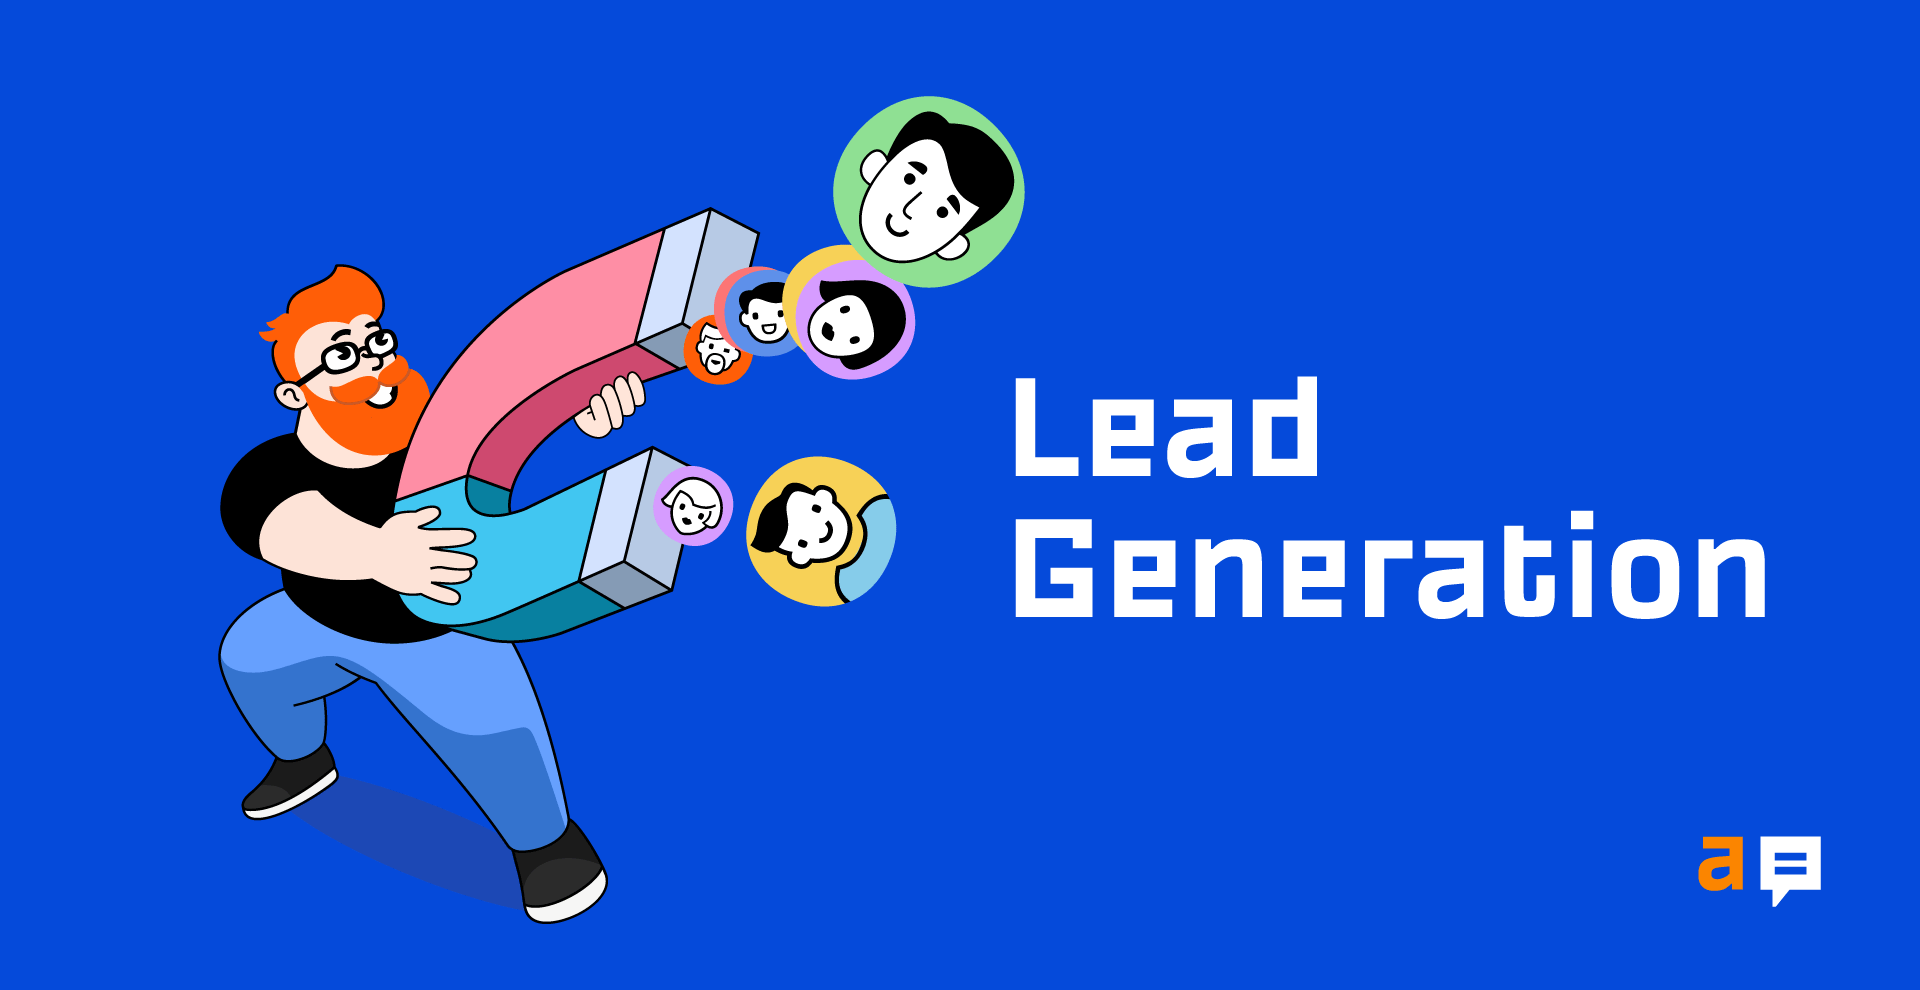 Lead Generation: The Beginner's Guide